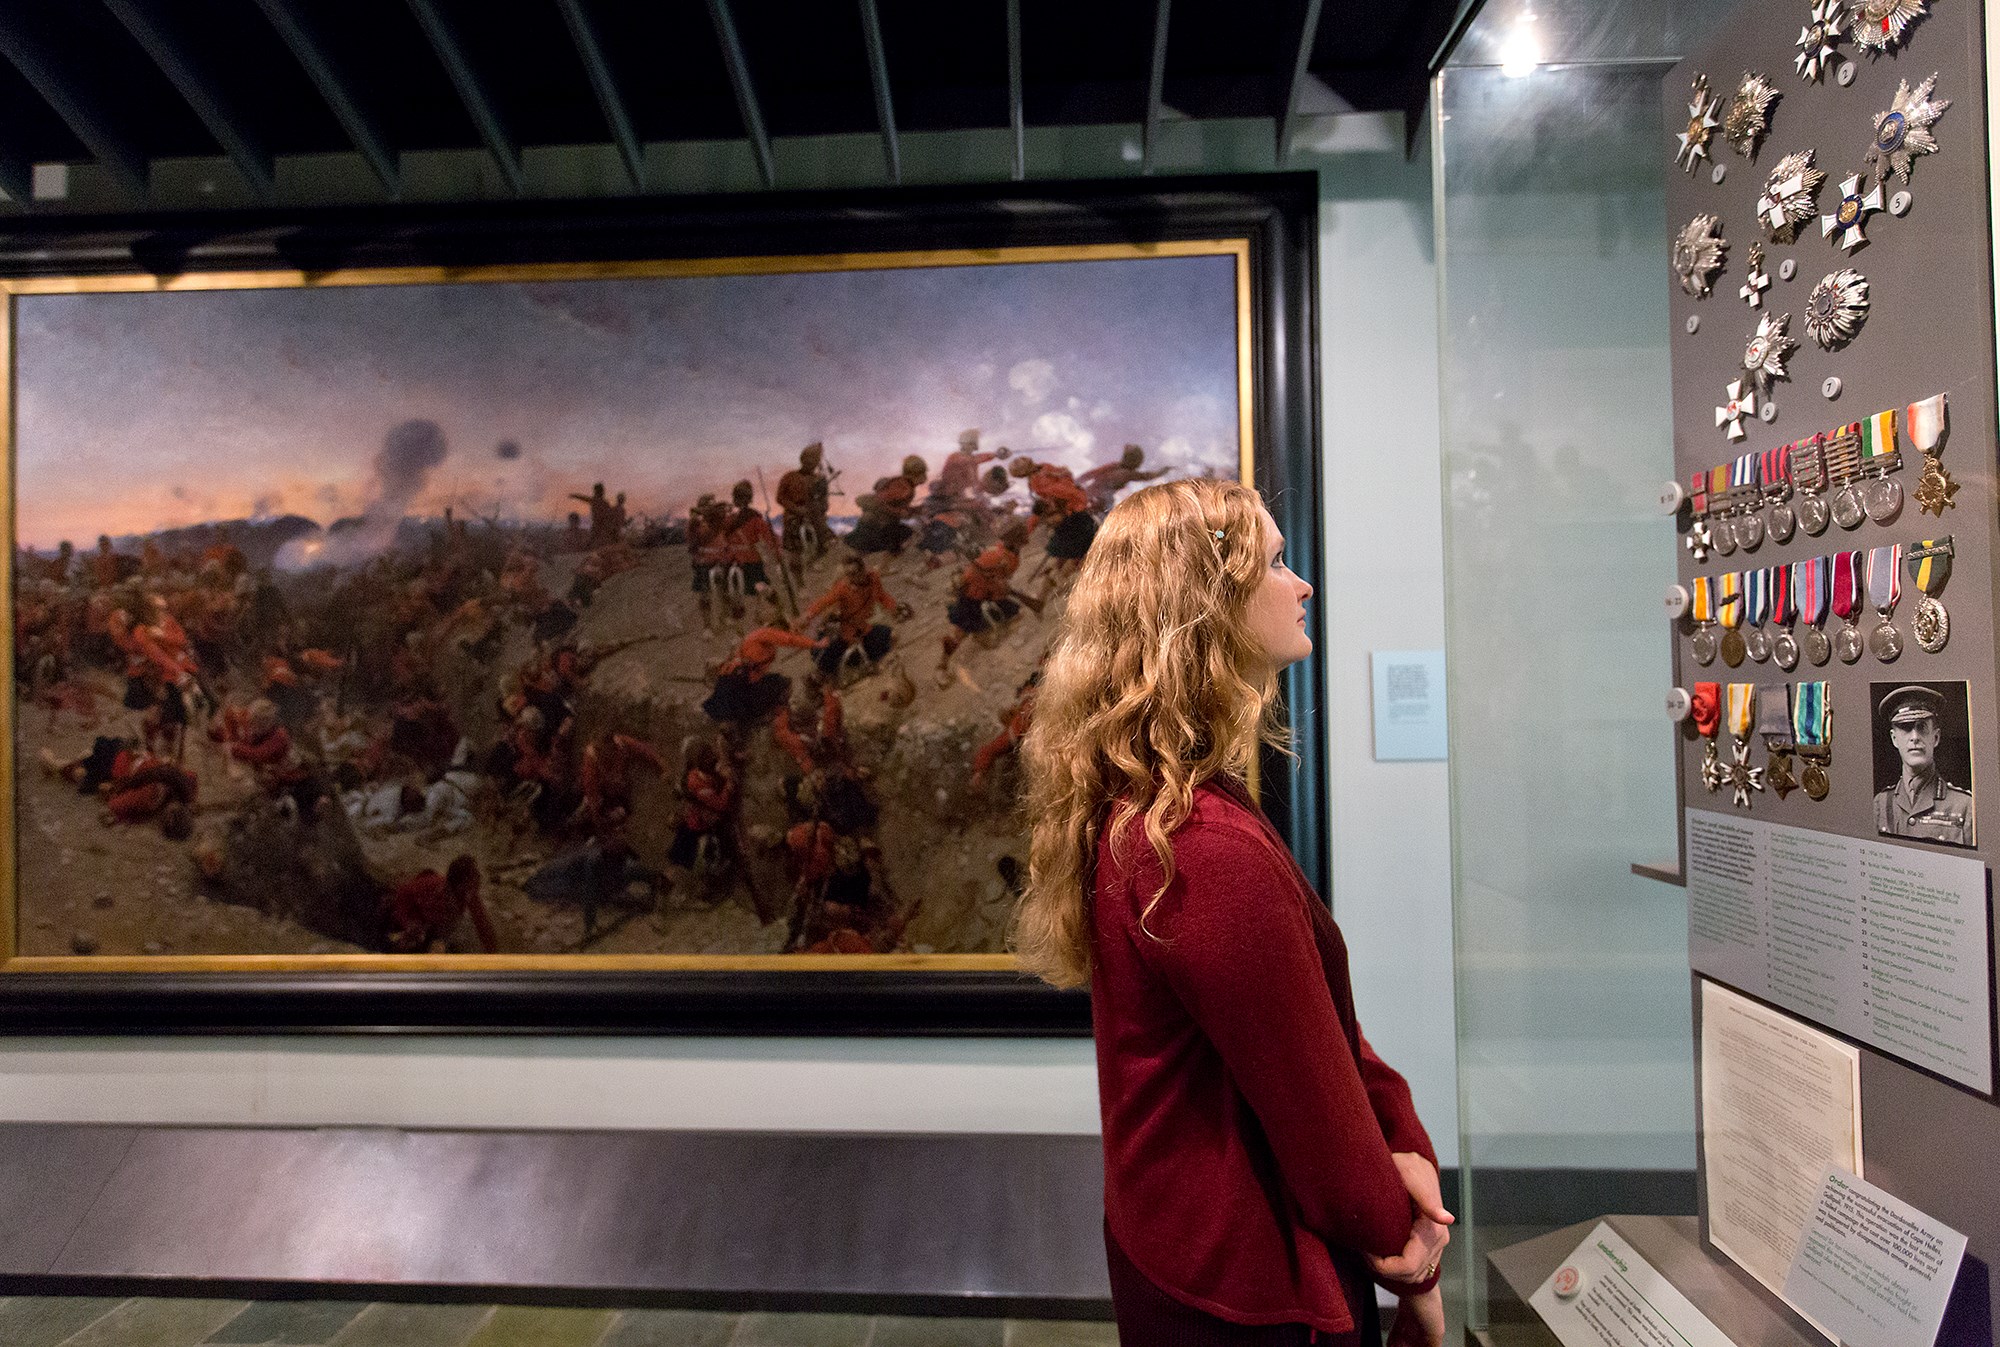 A visitor standing in front of a large painting of a battlefield looks at a display of medals hanging on colourful ribbons in a glass case.